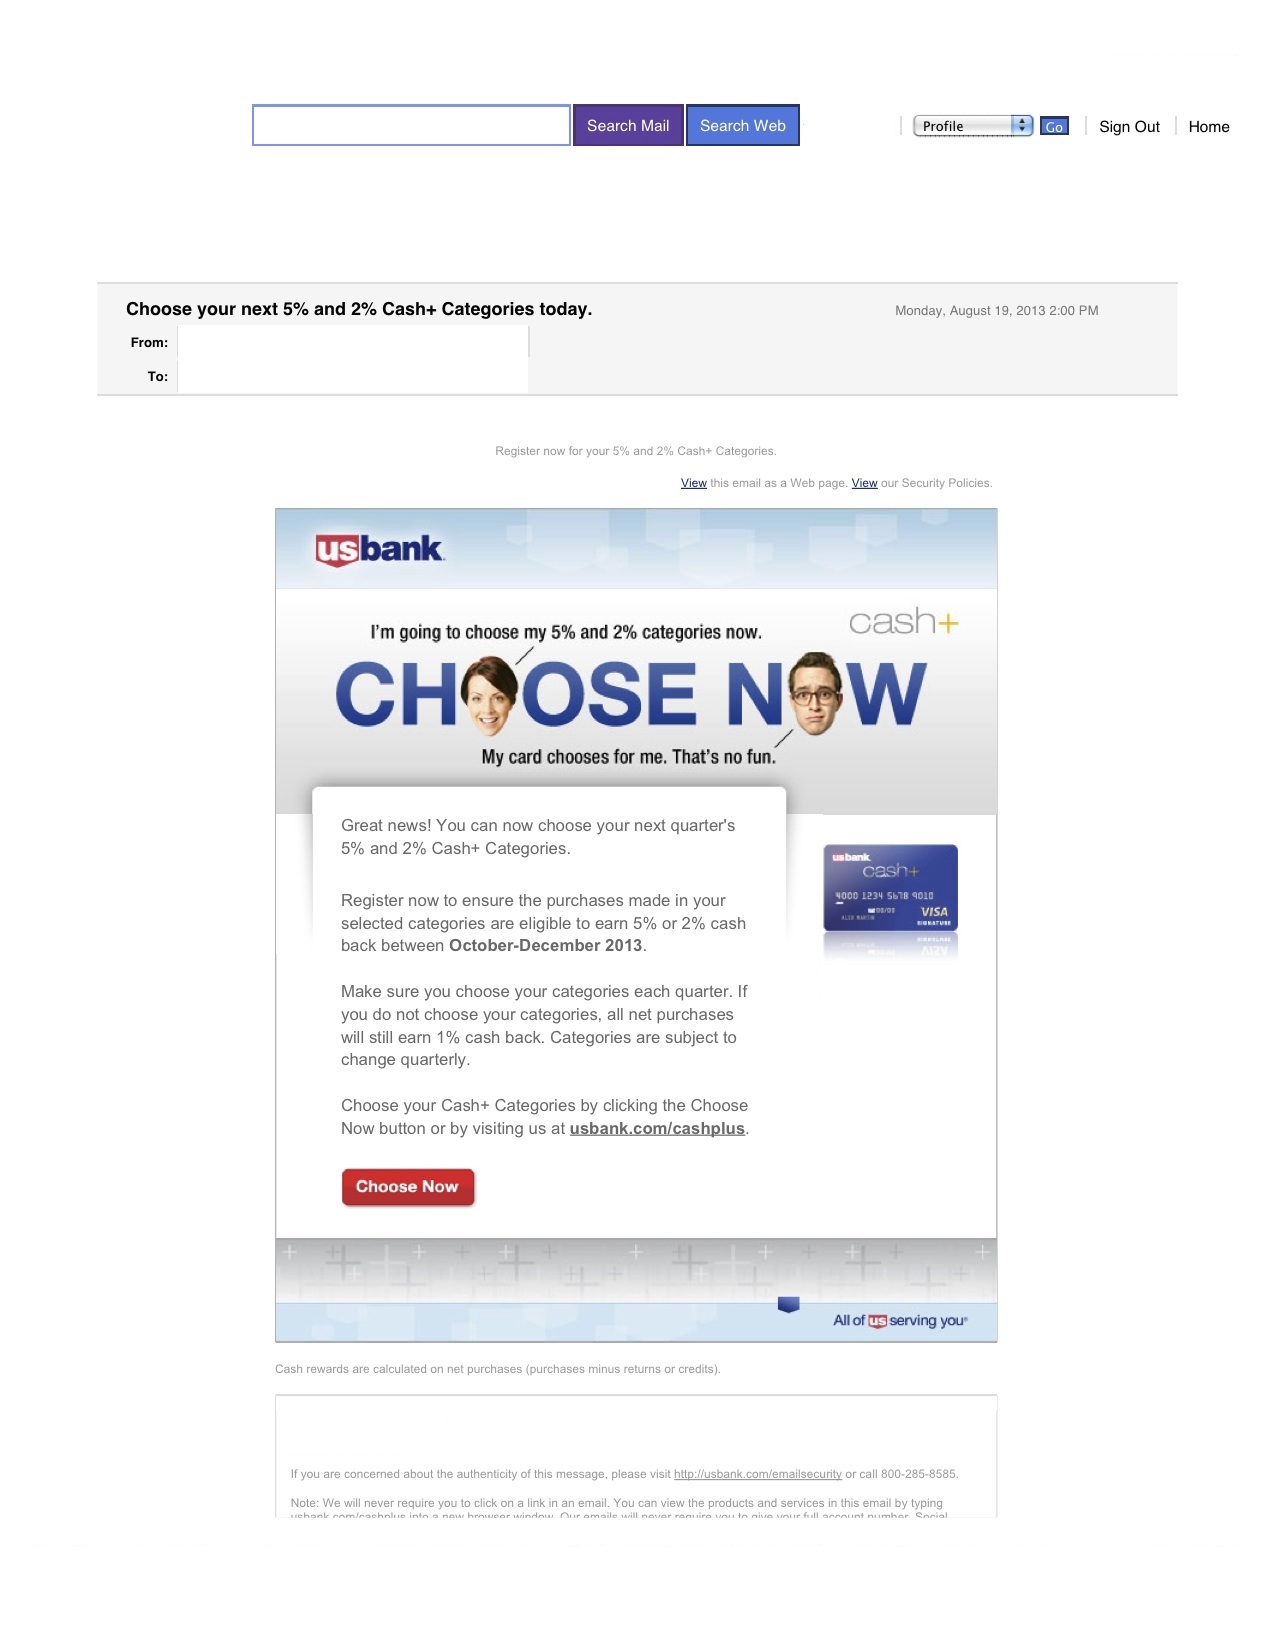 Choose your next 5% and 2% Cash+ Categories today. - Yahoo! Mail.jpg